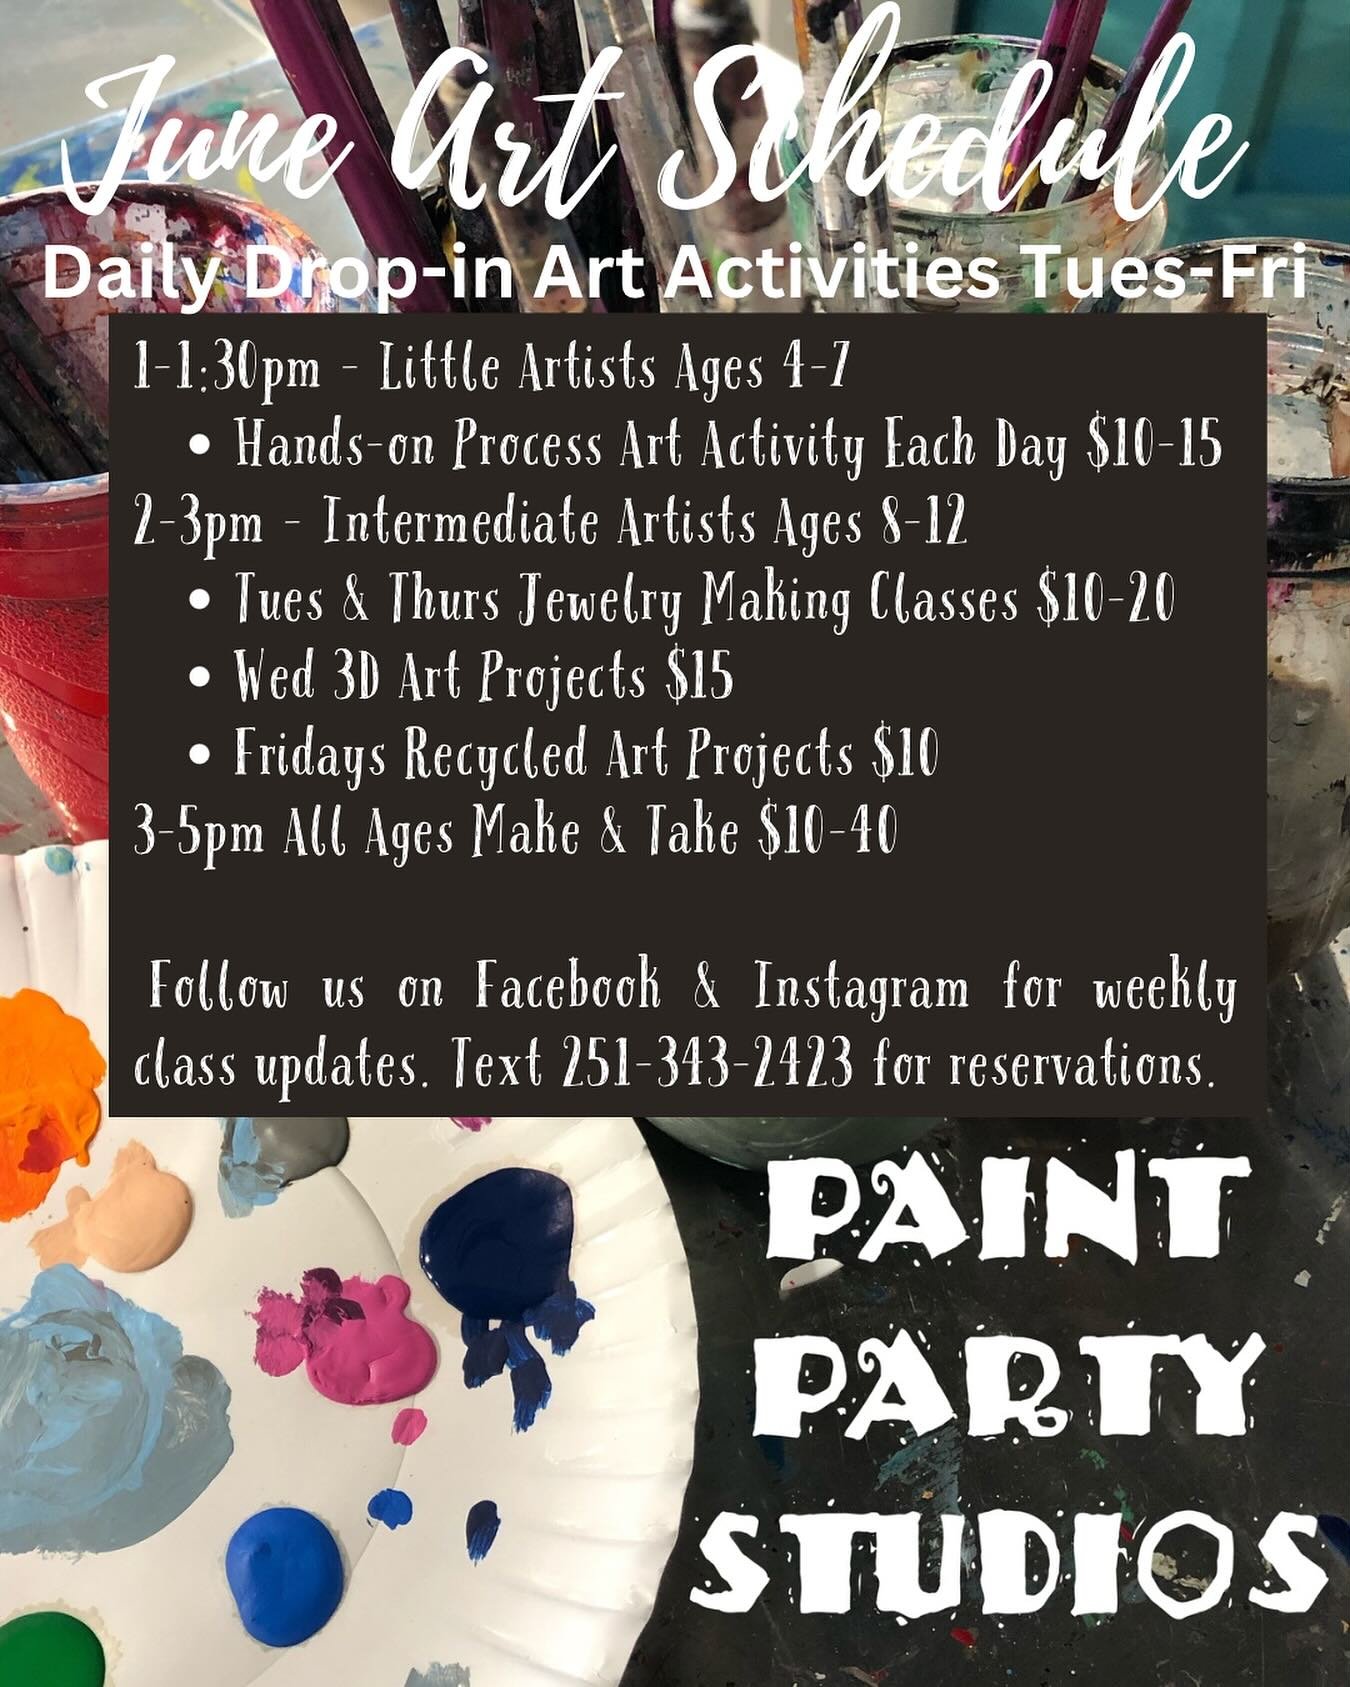 In June we&rsquo;ll be open Tuesday-Friday from 1-5pm for Daily Drop-in Art Classes and All Ages Make &amp; Take. Follow us for weekly class details. We&rsquo;ll still be available for private party reservations outside of these hours - text Courtney